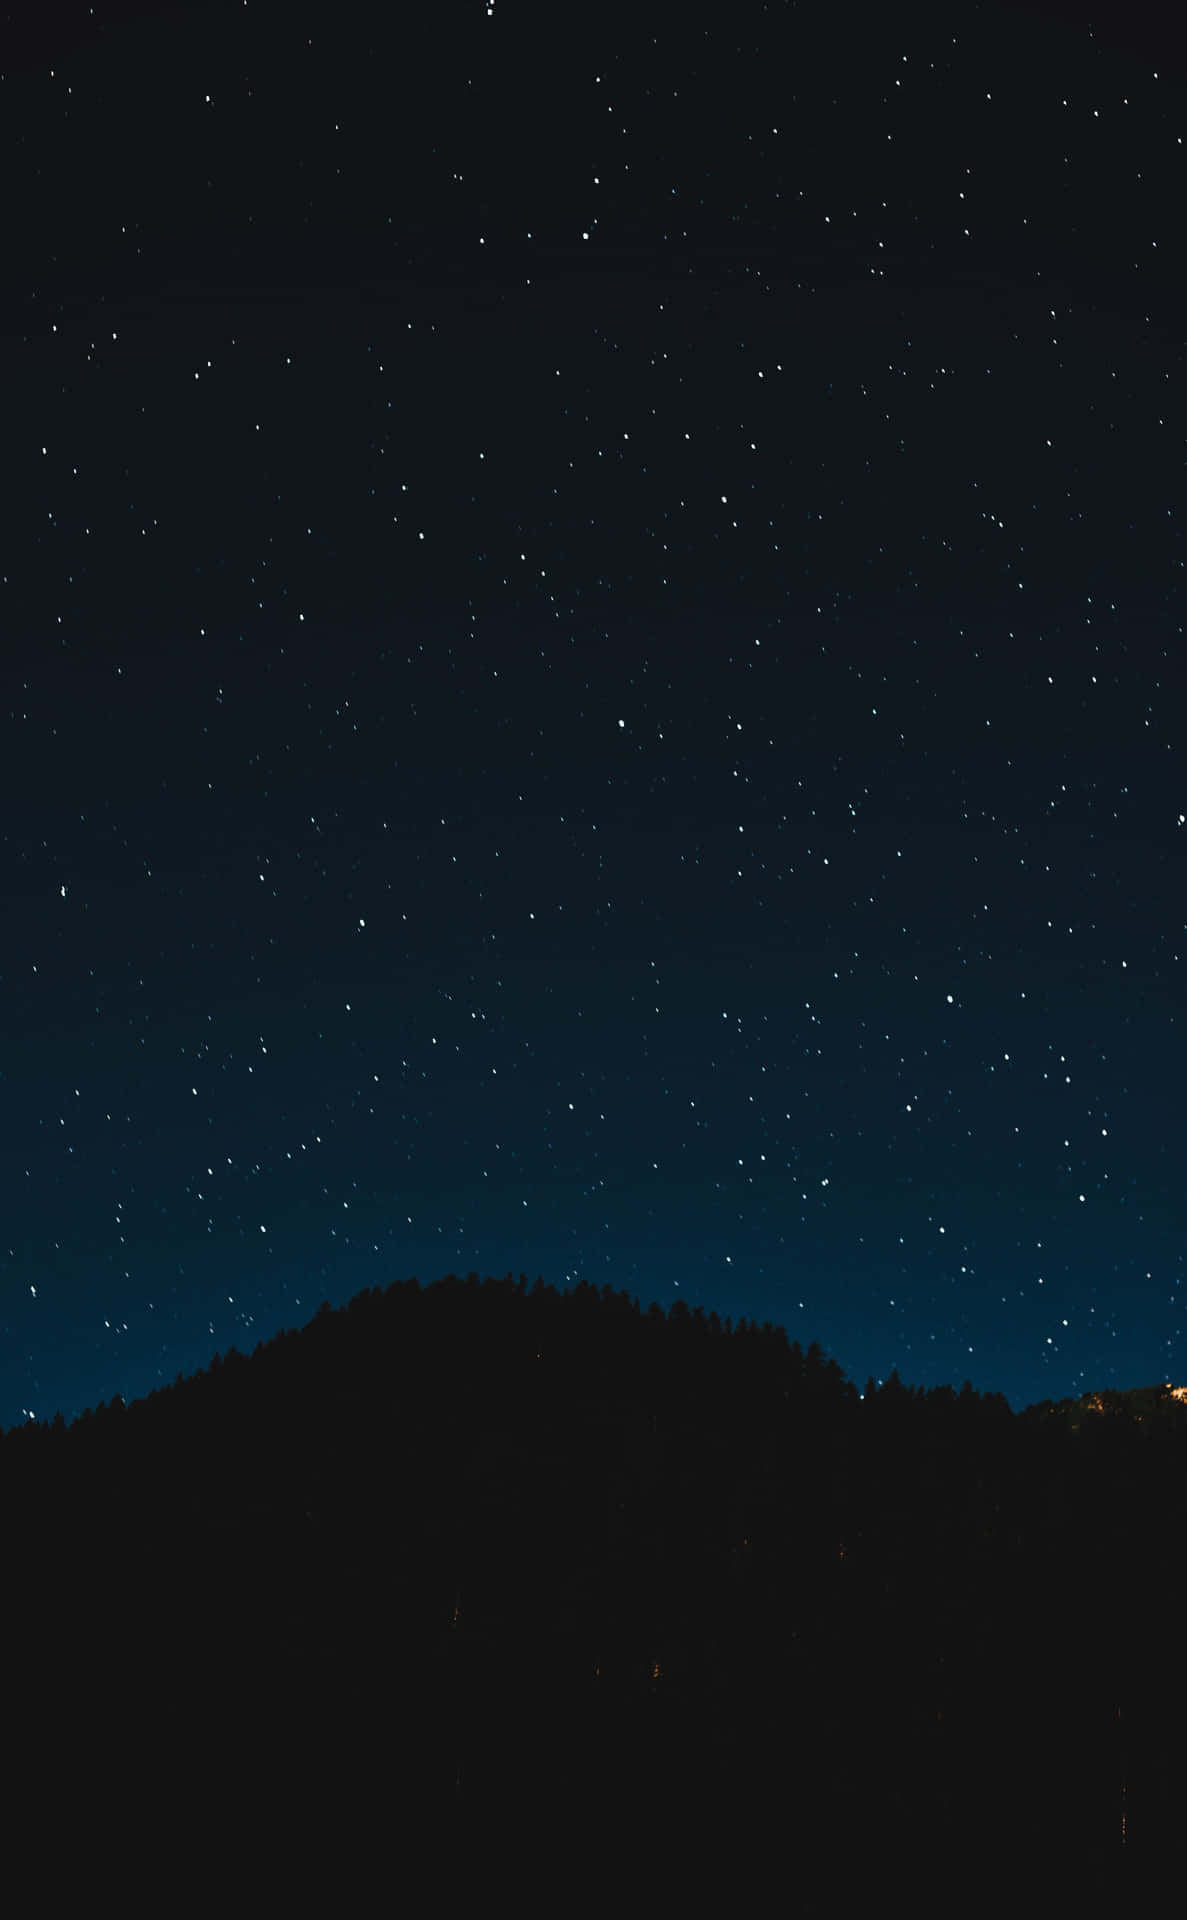 Aesthetic Night Sky With Stars Wallpaper